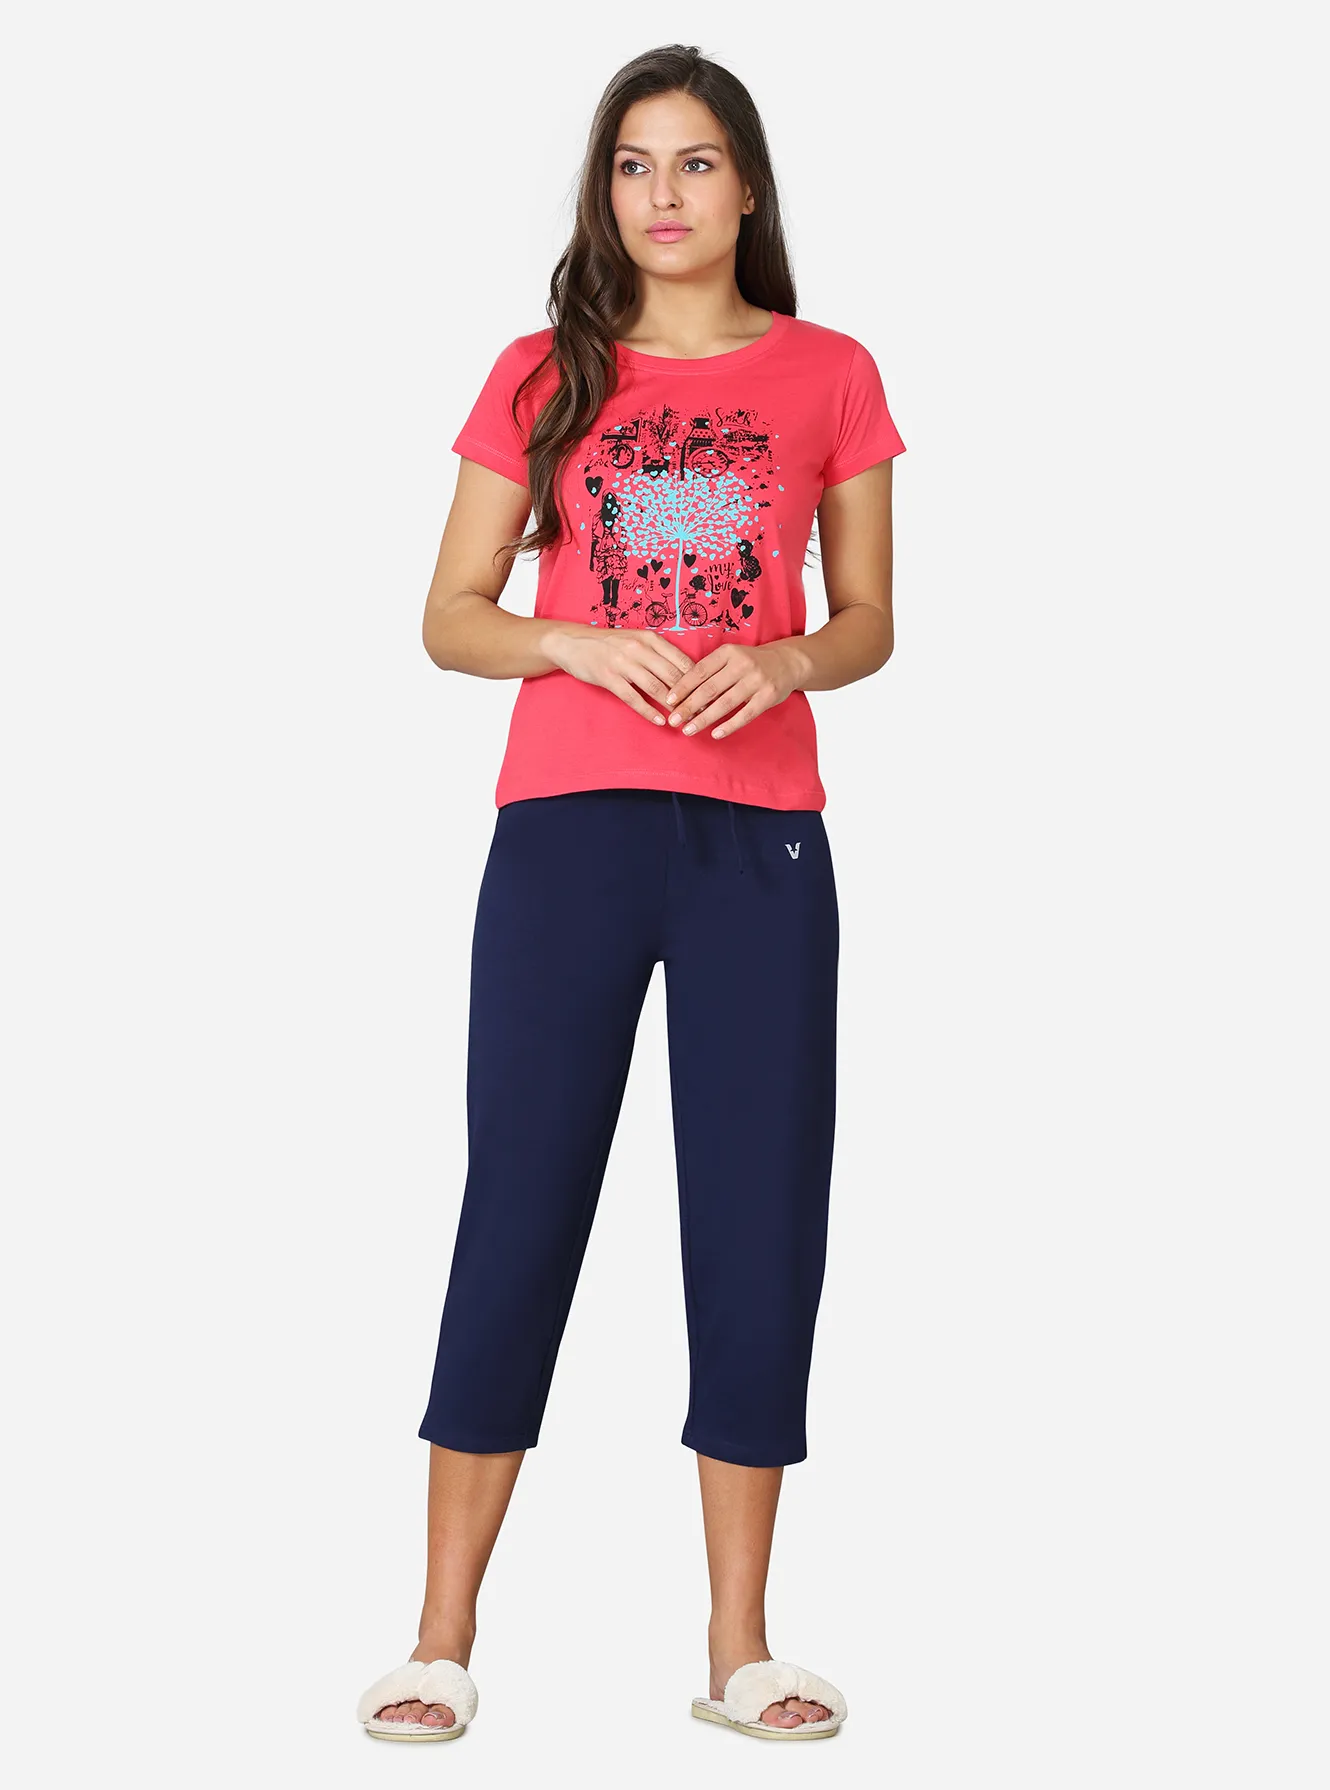 V Star - Leap into comfort or lounge in style with our versatile Capri  pants! ​ ​Whether you're relaxing or active, these are your go-to for  lounging, leisure, or leaping into action.​ ​